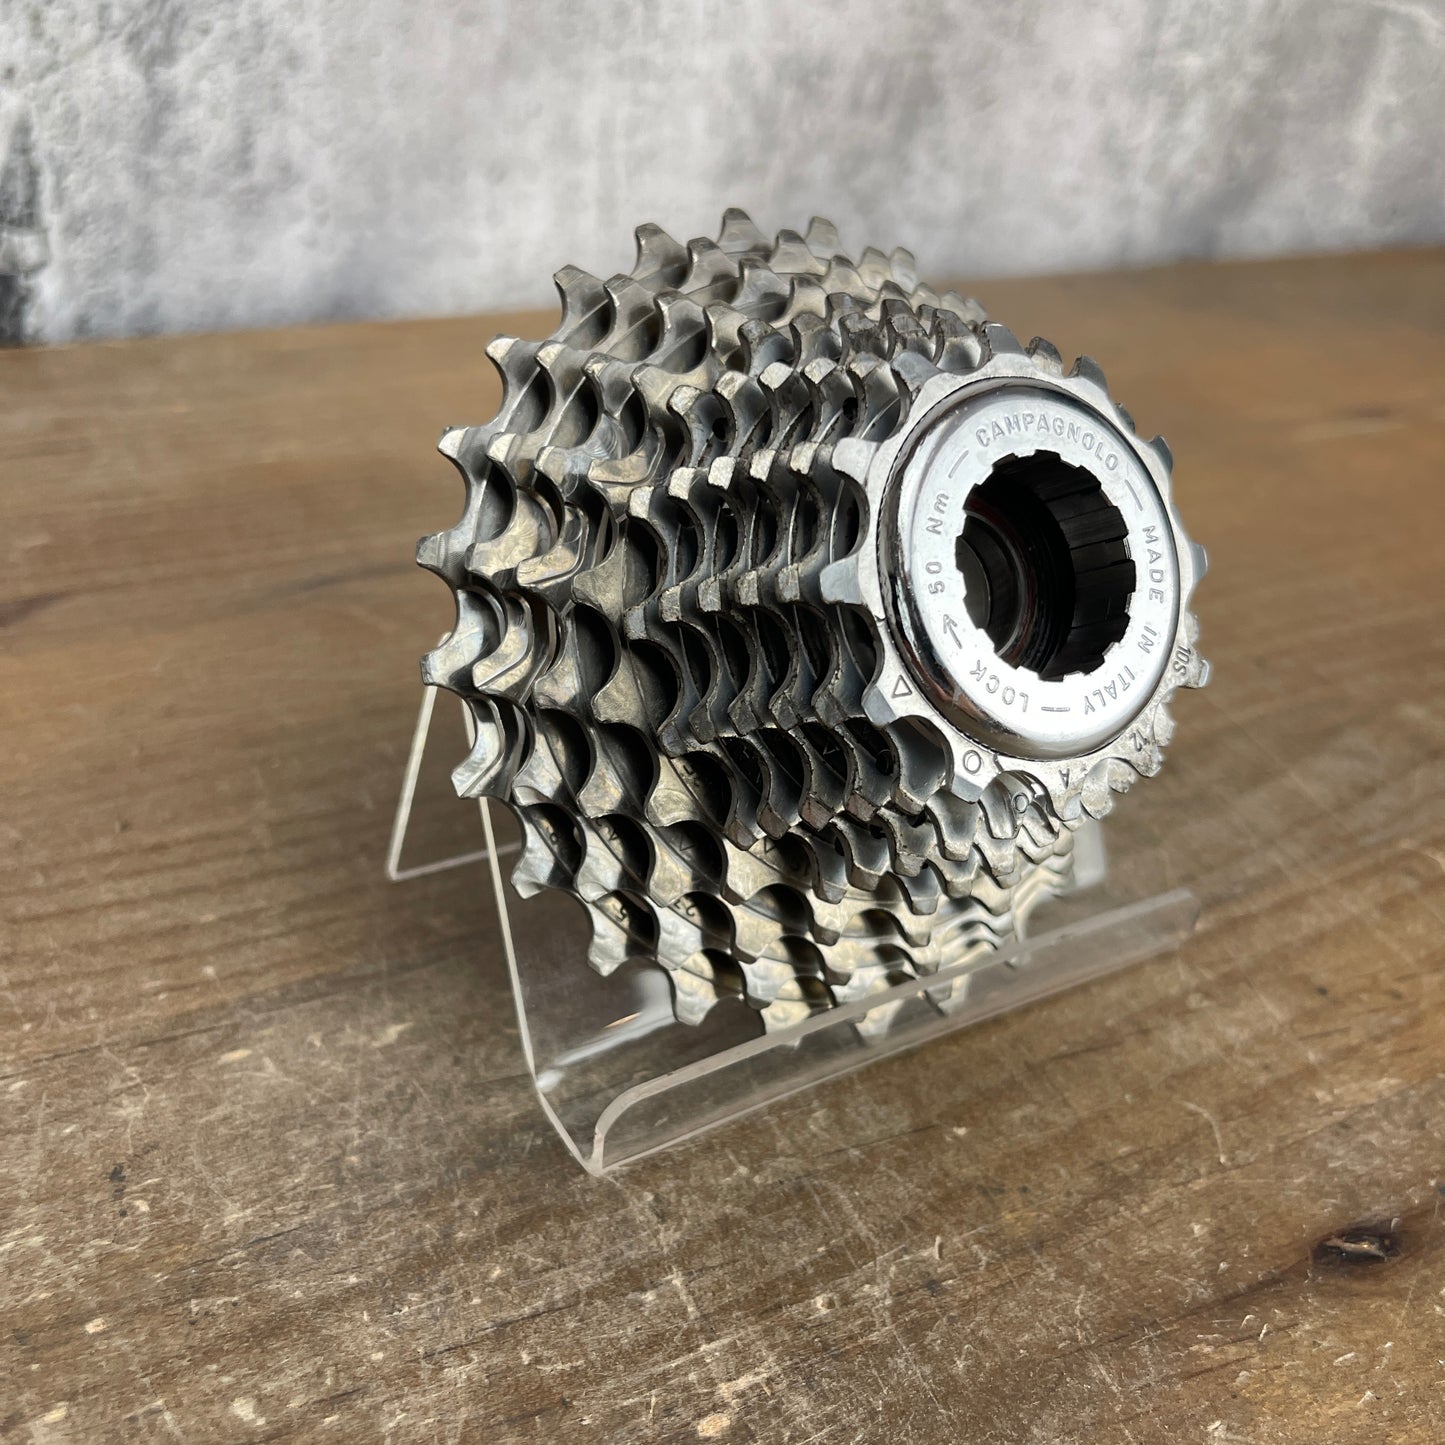 Campagnolo Record 10 12-25t 10-Speed Road Bike Cassette "Typical Wear" 212g